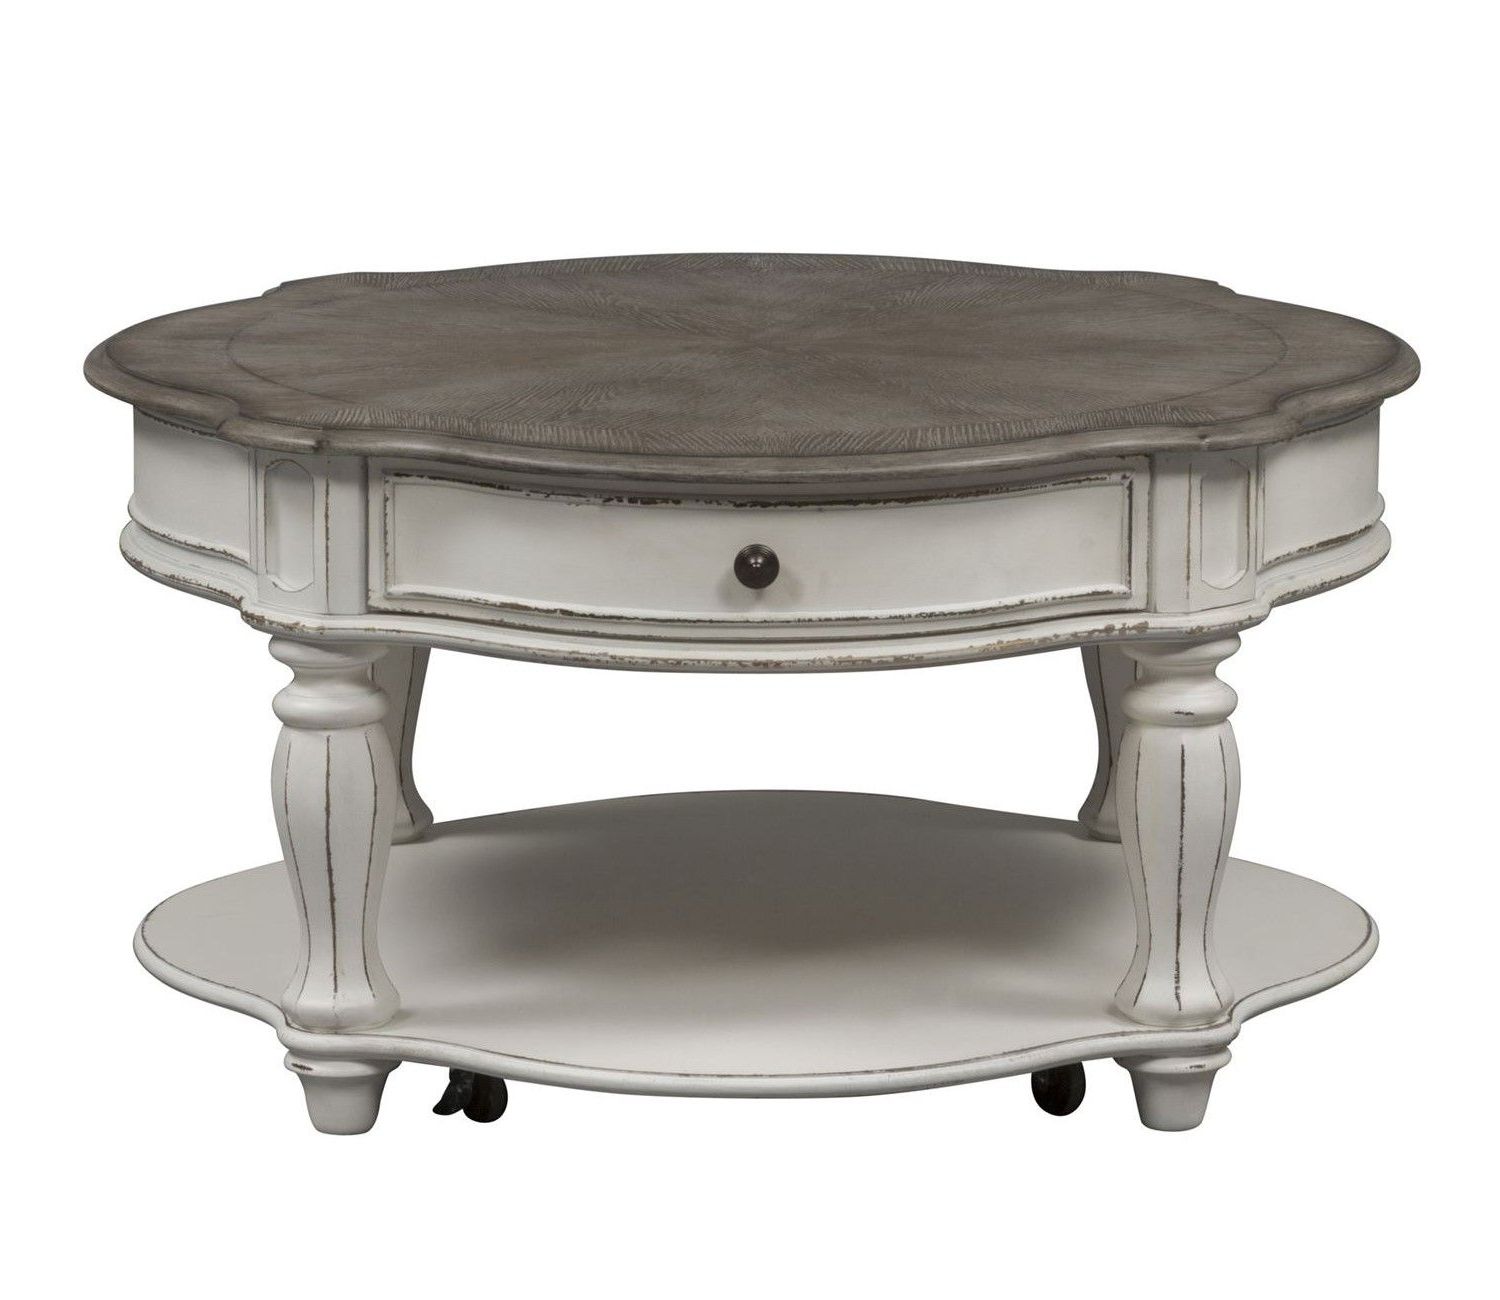 Magnolia Traditional Antique White Round Coffee Table W Pertaining To Fashionable Round Coffee Tables (View 16 of 20)